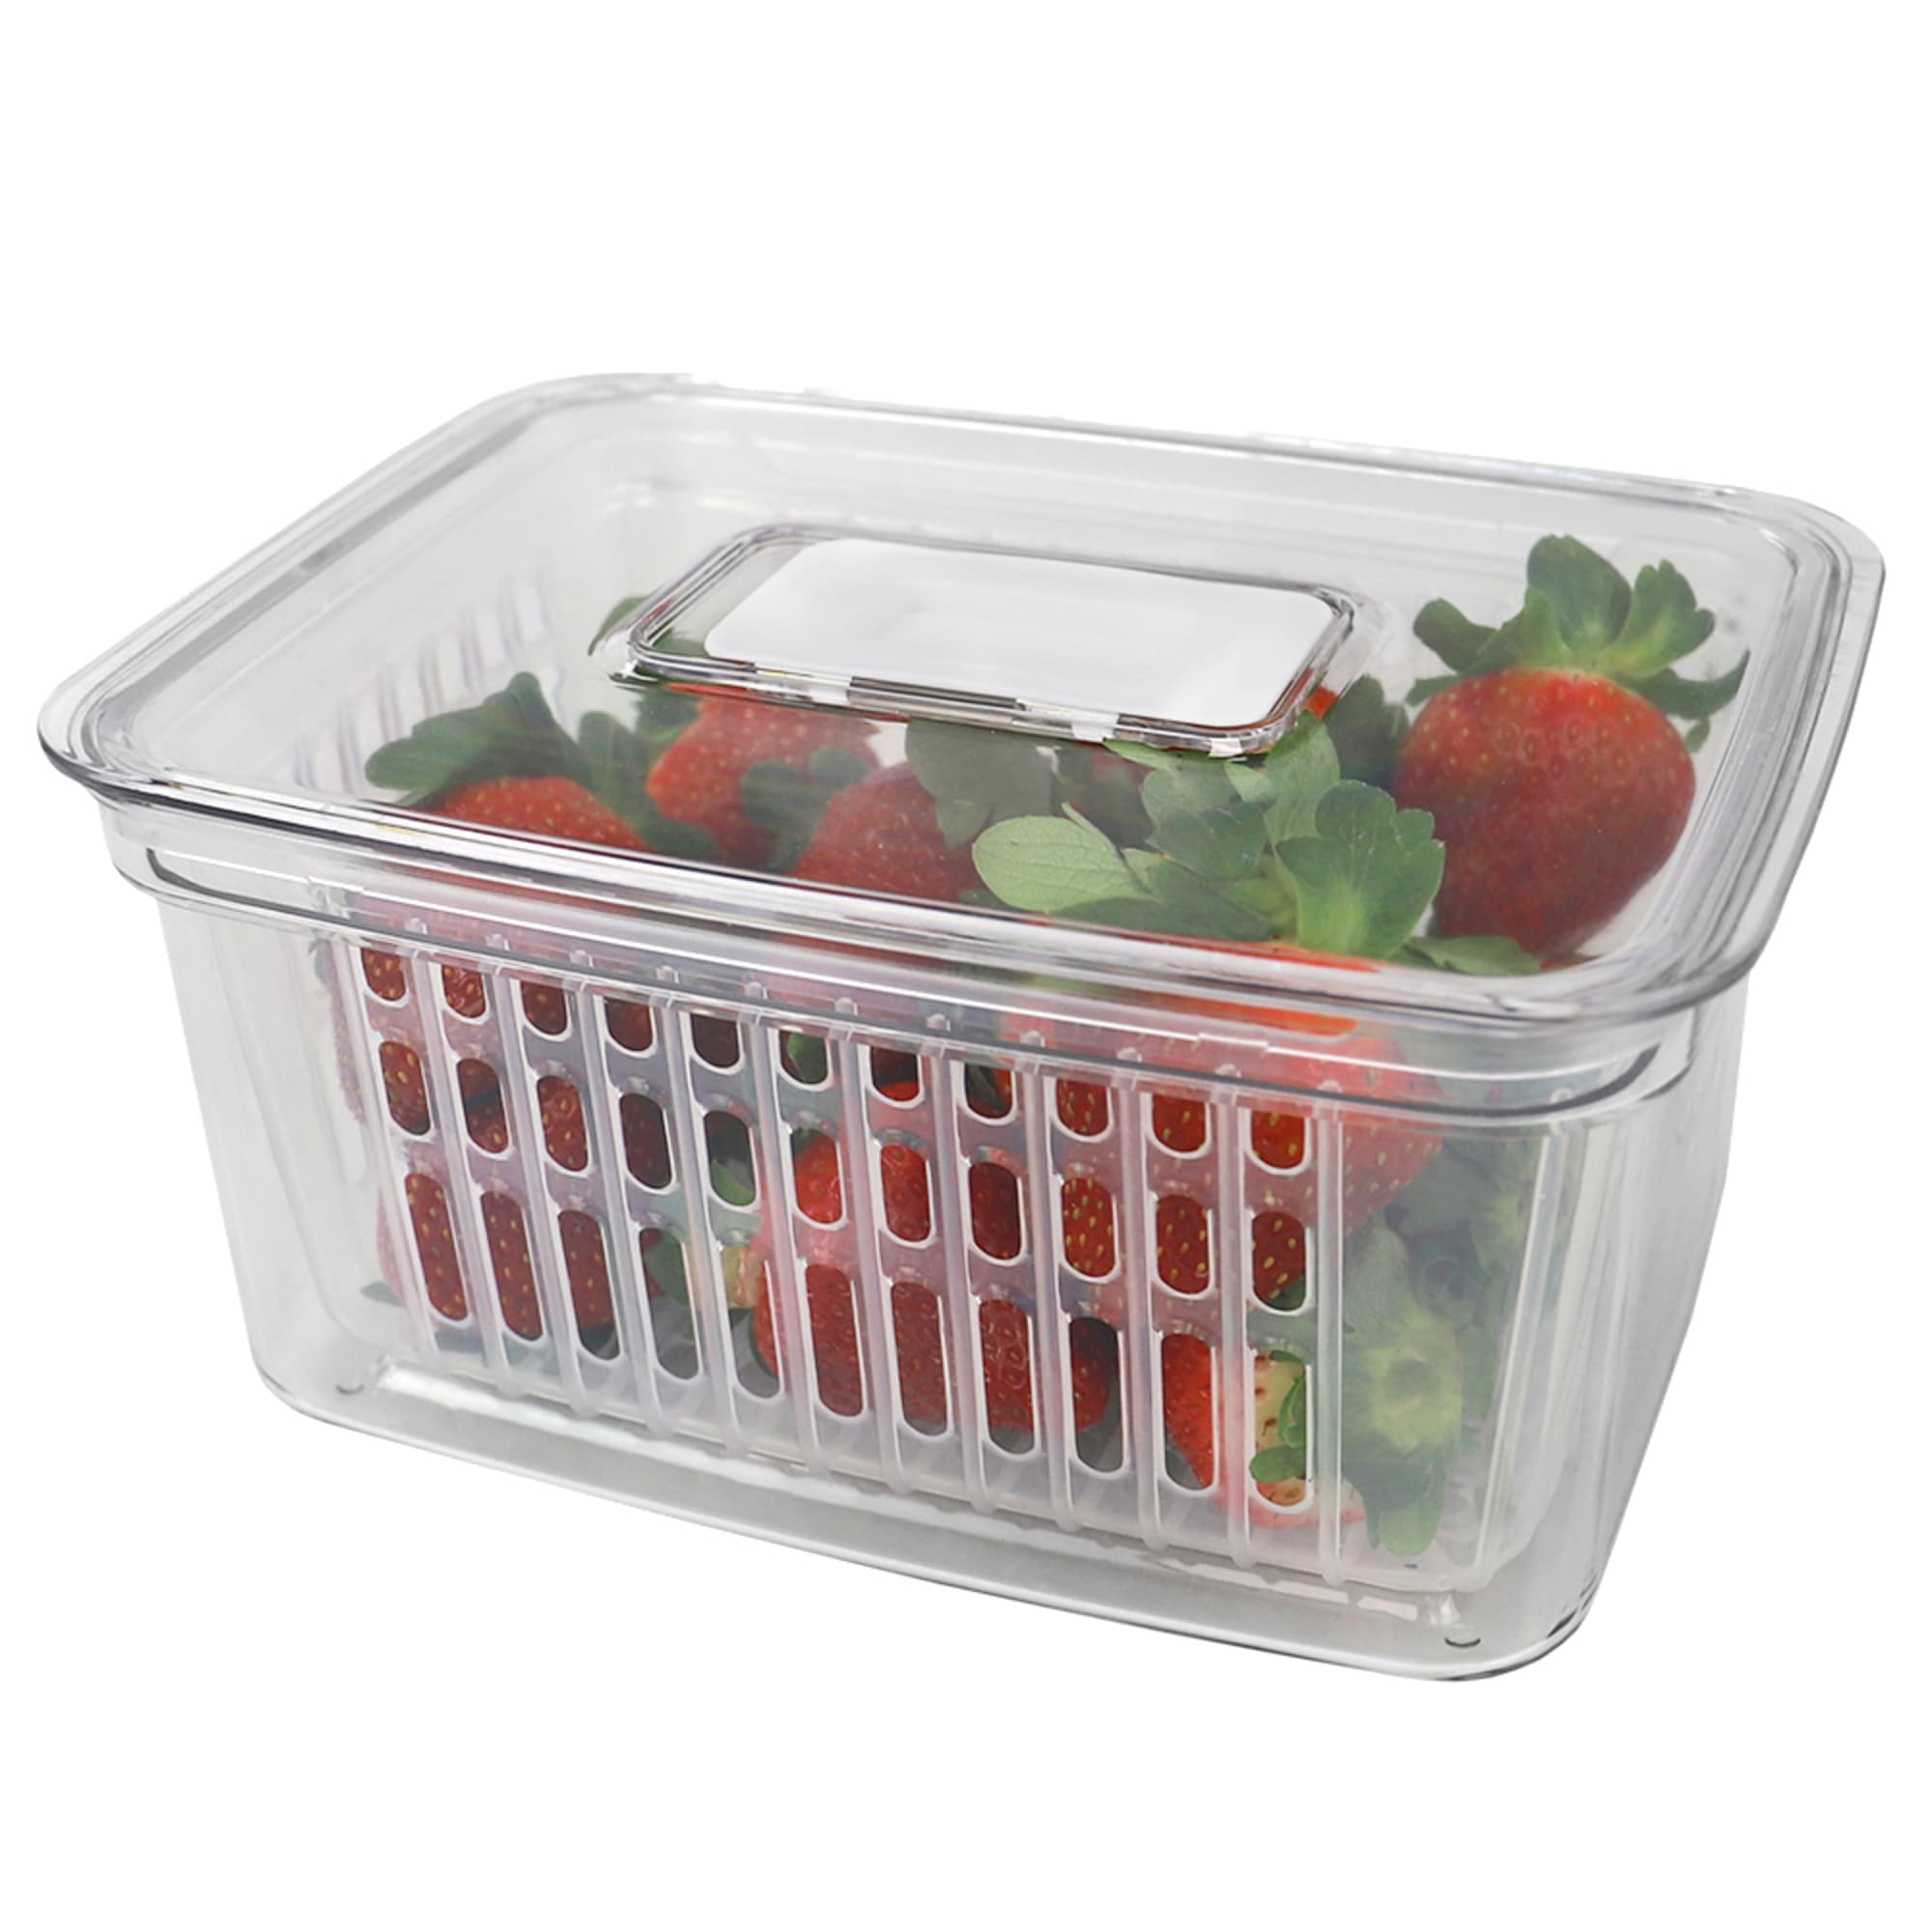 Home Basics Keep Fresh Small Vegetable Keeper, Clear $4.00 EACH, CASE PACK OF 12